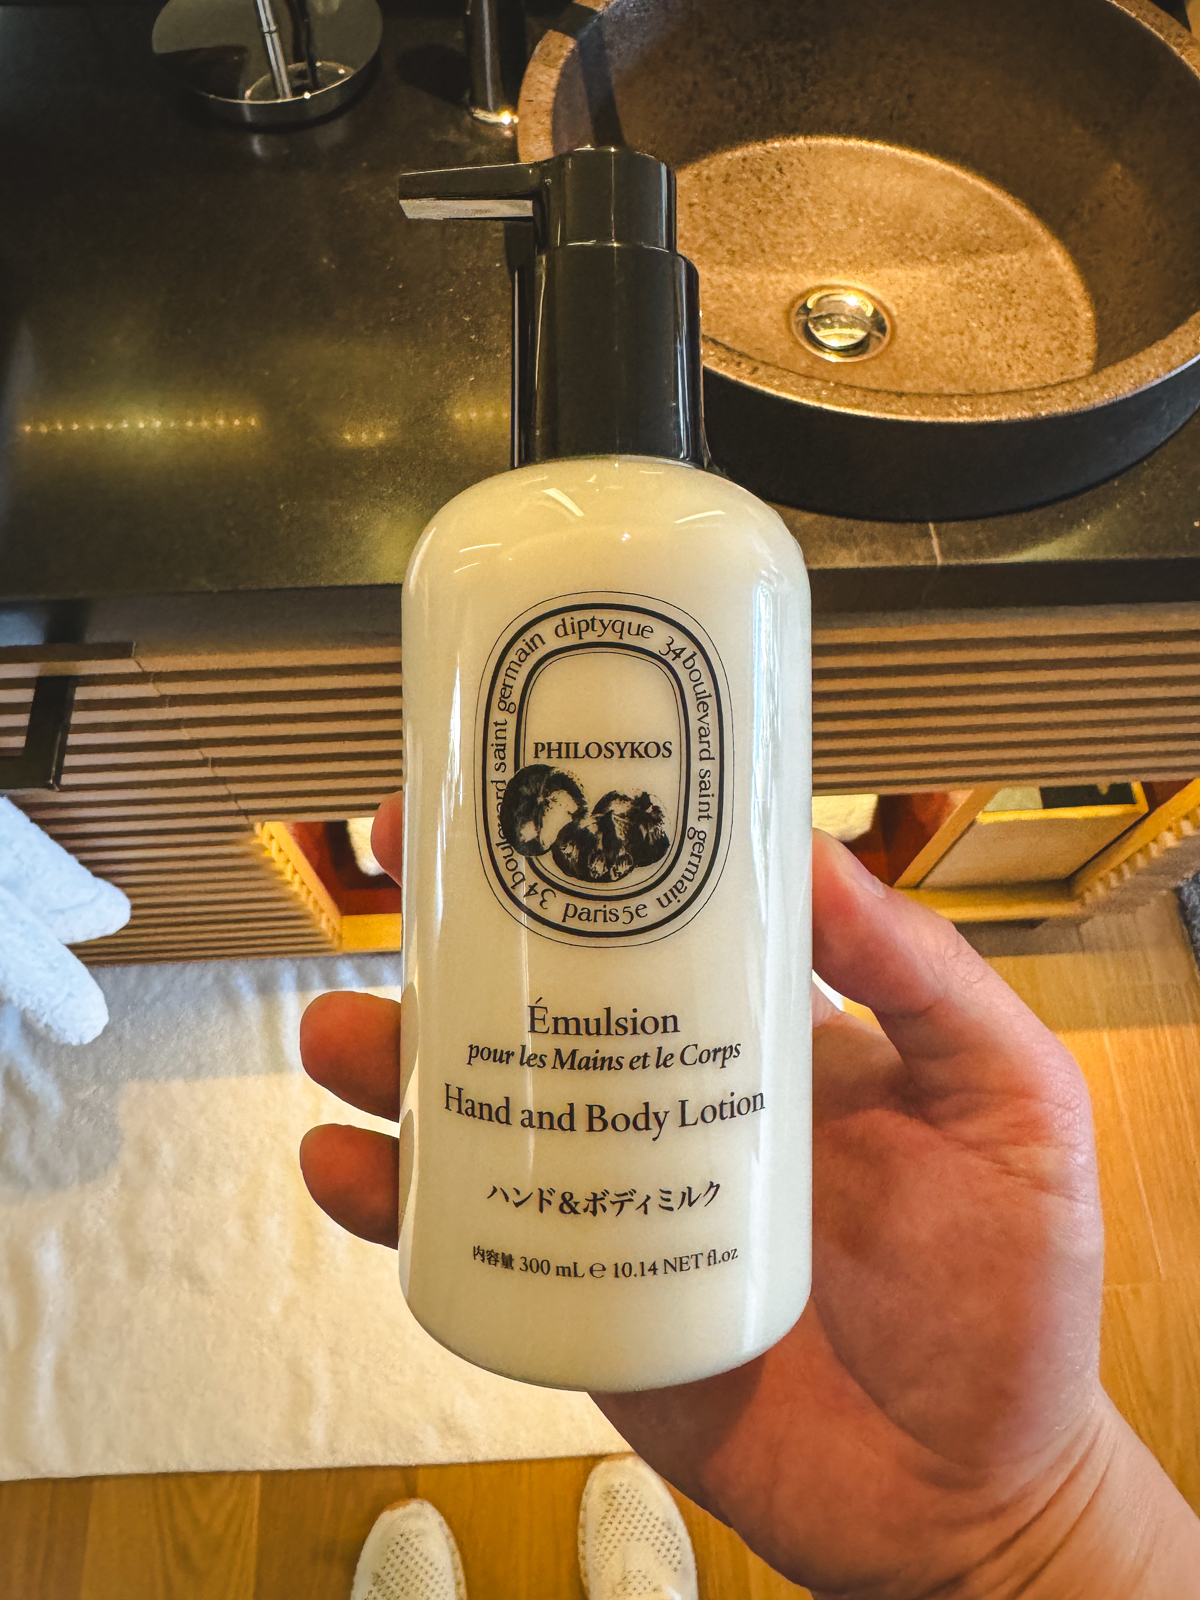 Hand and body lotion bottle from the Philosykos collection by Diptyque.